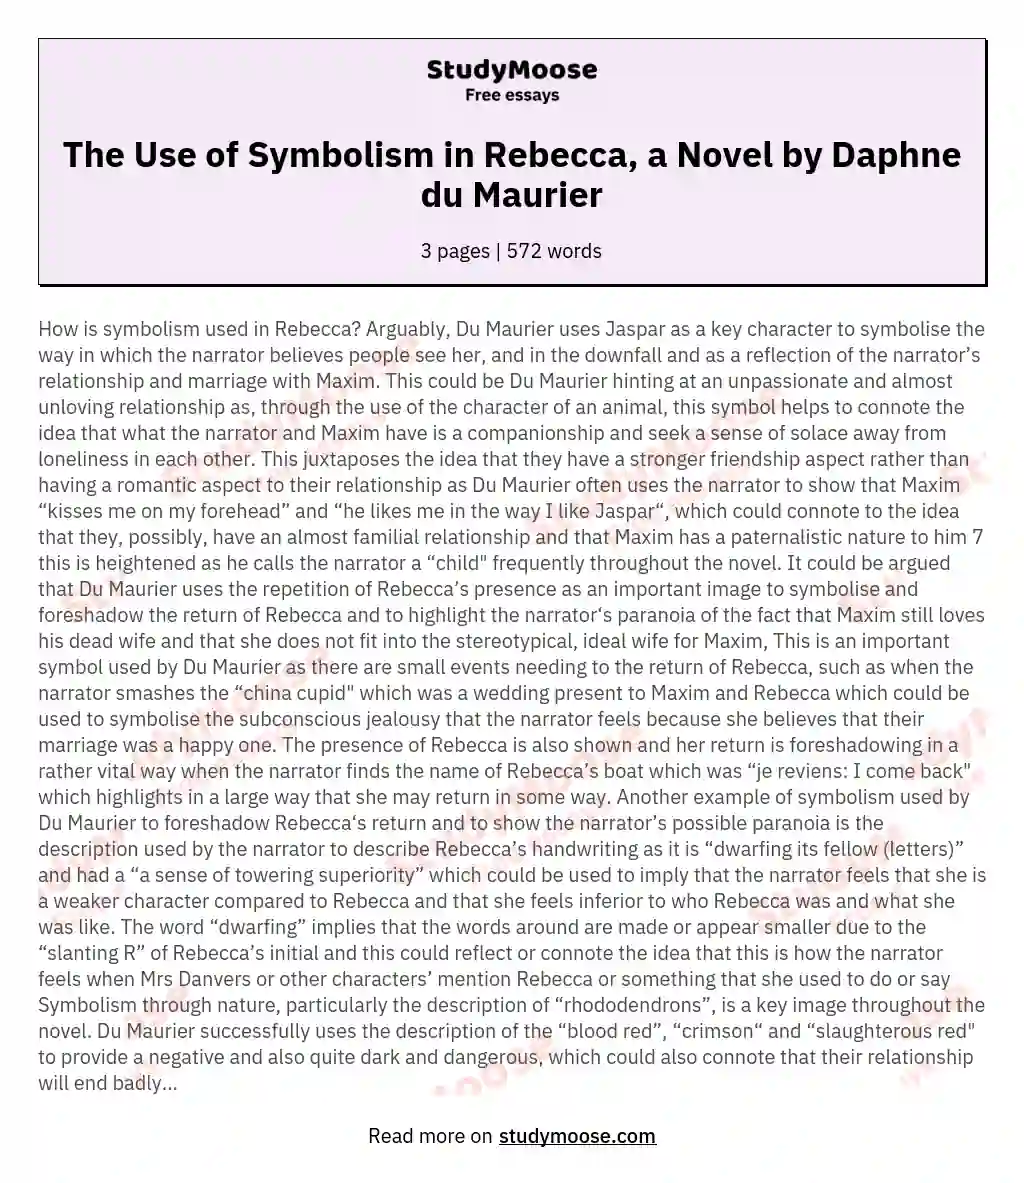 The Use of Symbolism in Rebecca, a Novel by Daphne du Maurier essay